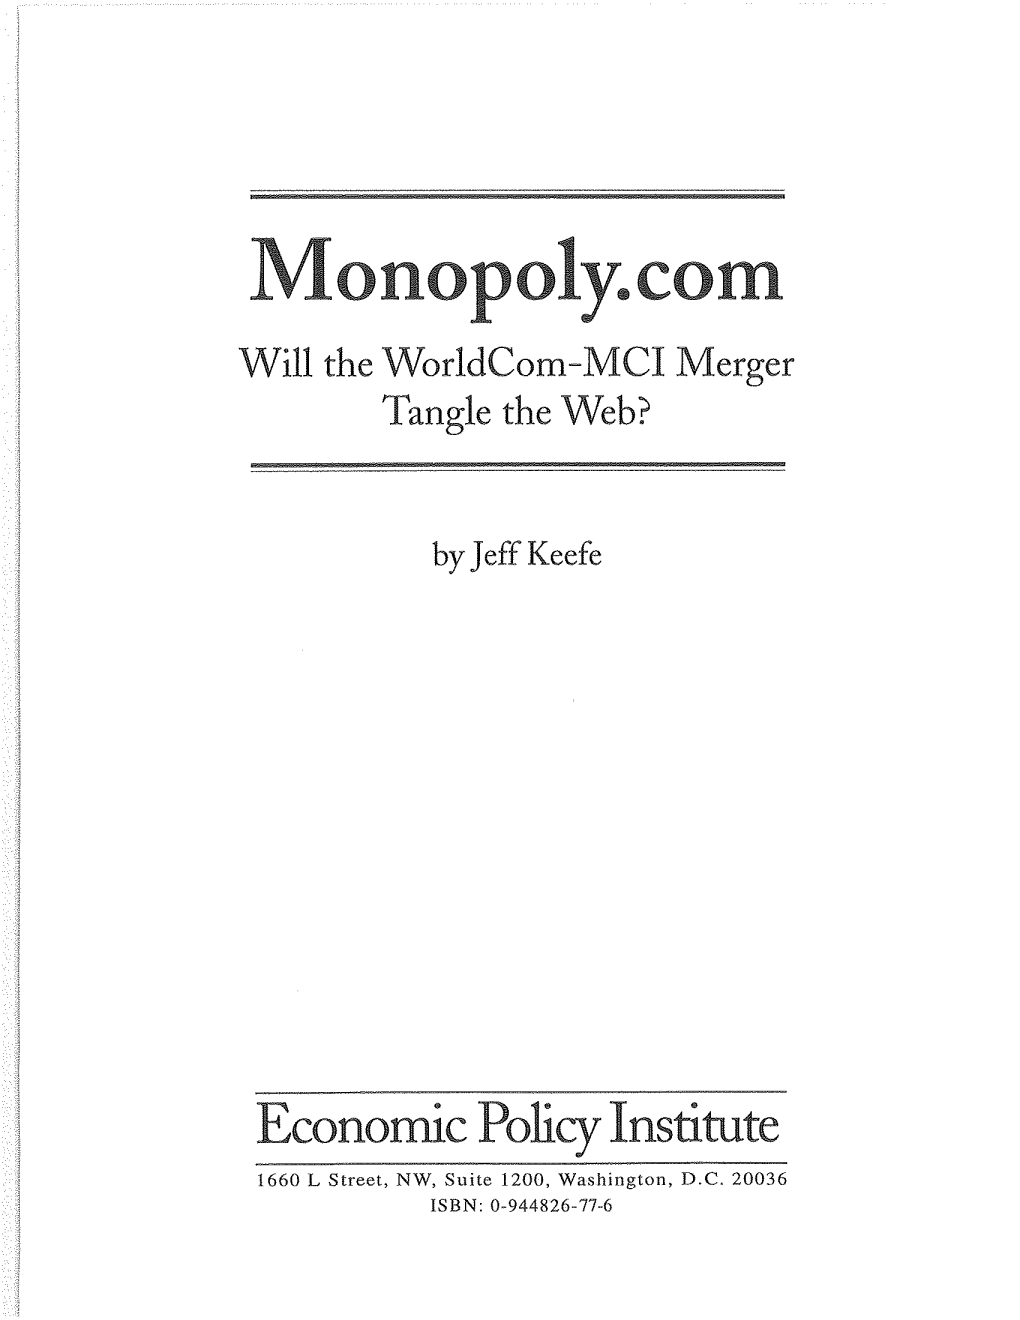 Monopoly. Com Will the Worldcom-MCI Merger Tangle the Web?